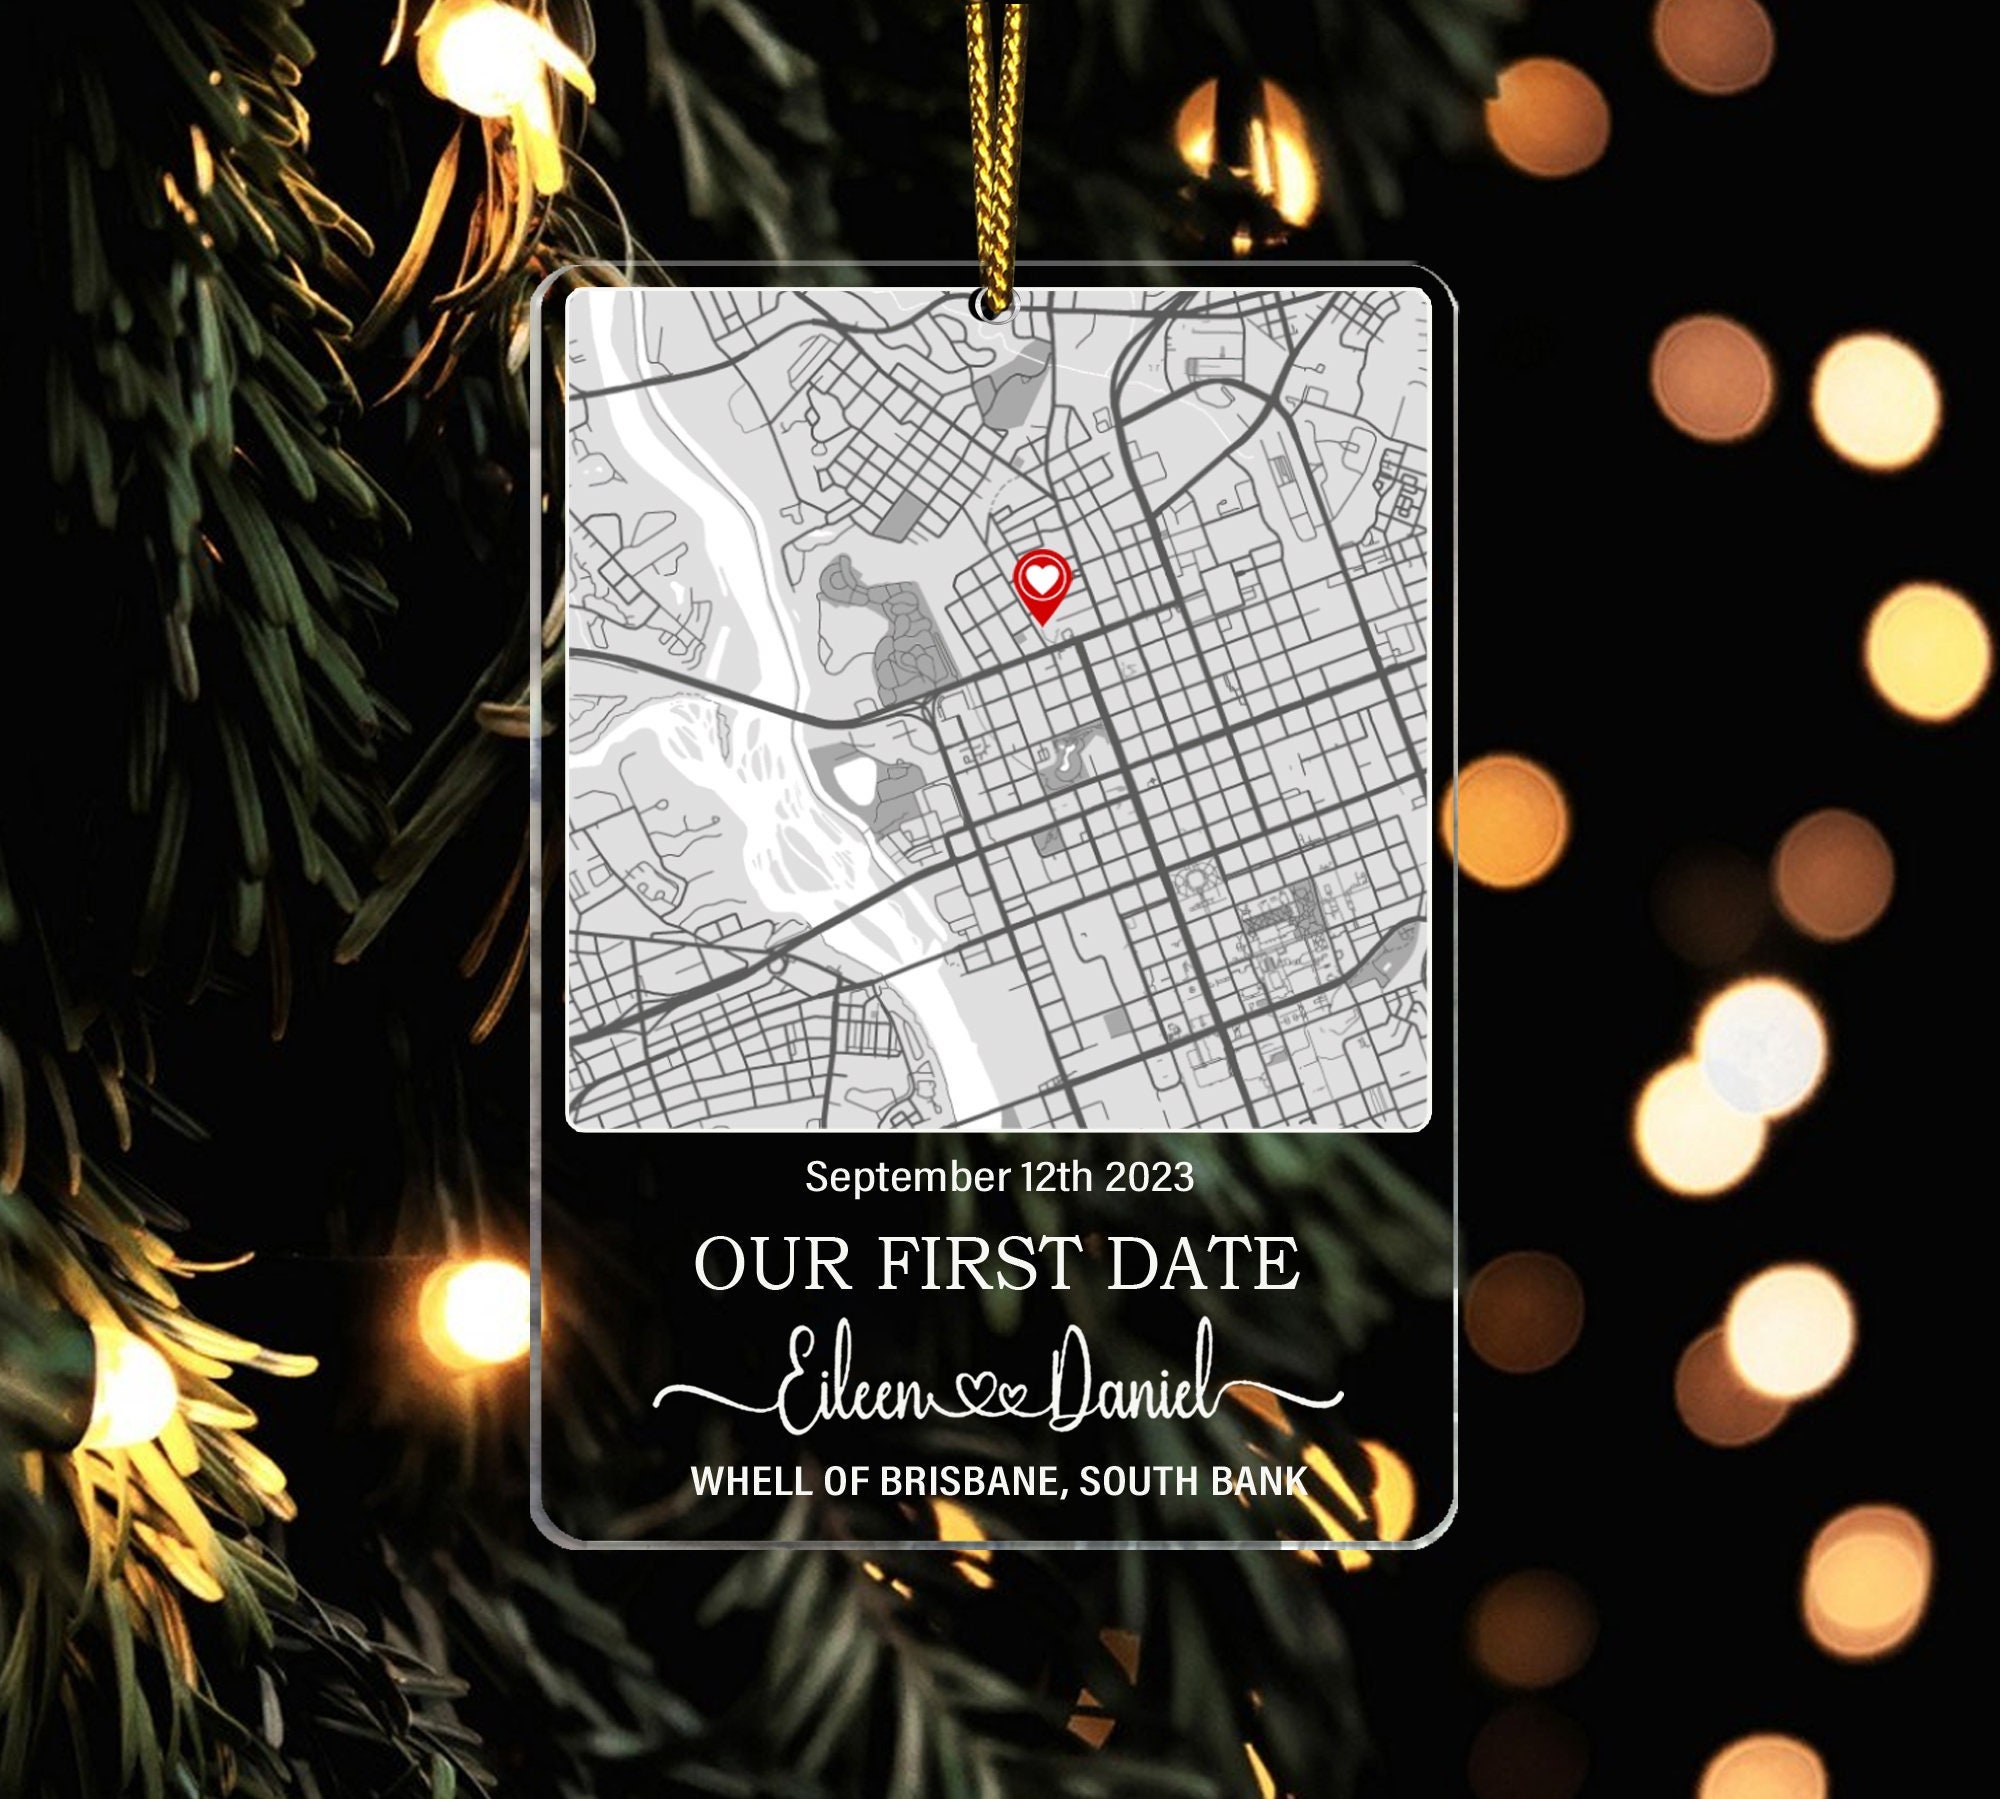 Personalised First Date Map, Our First Date Plaque, First Date